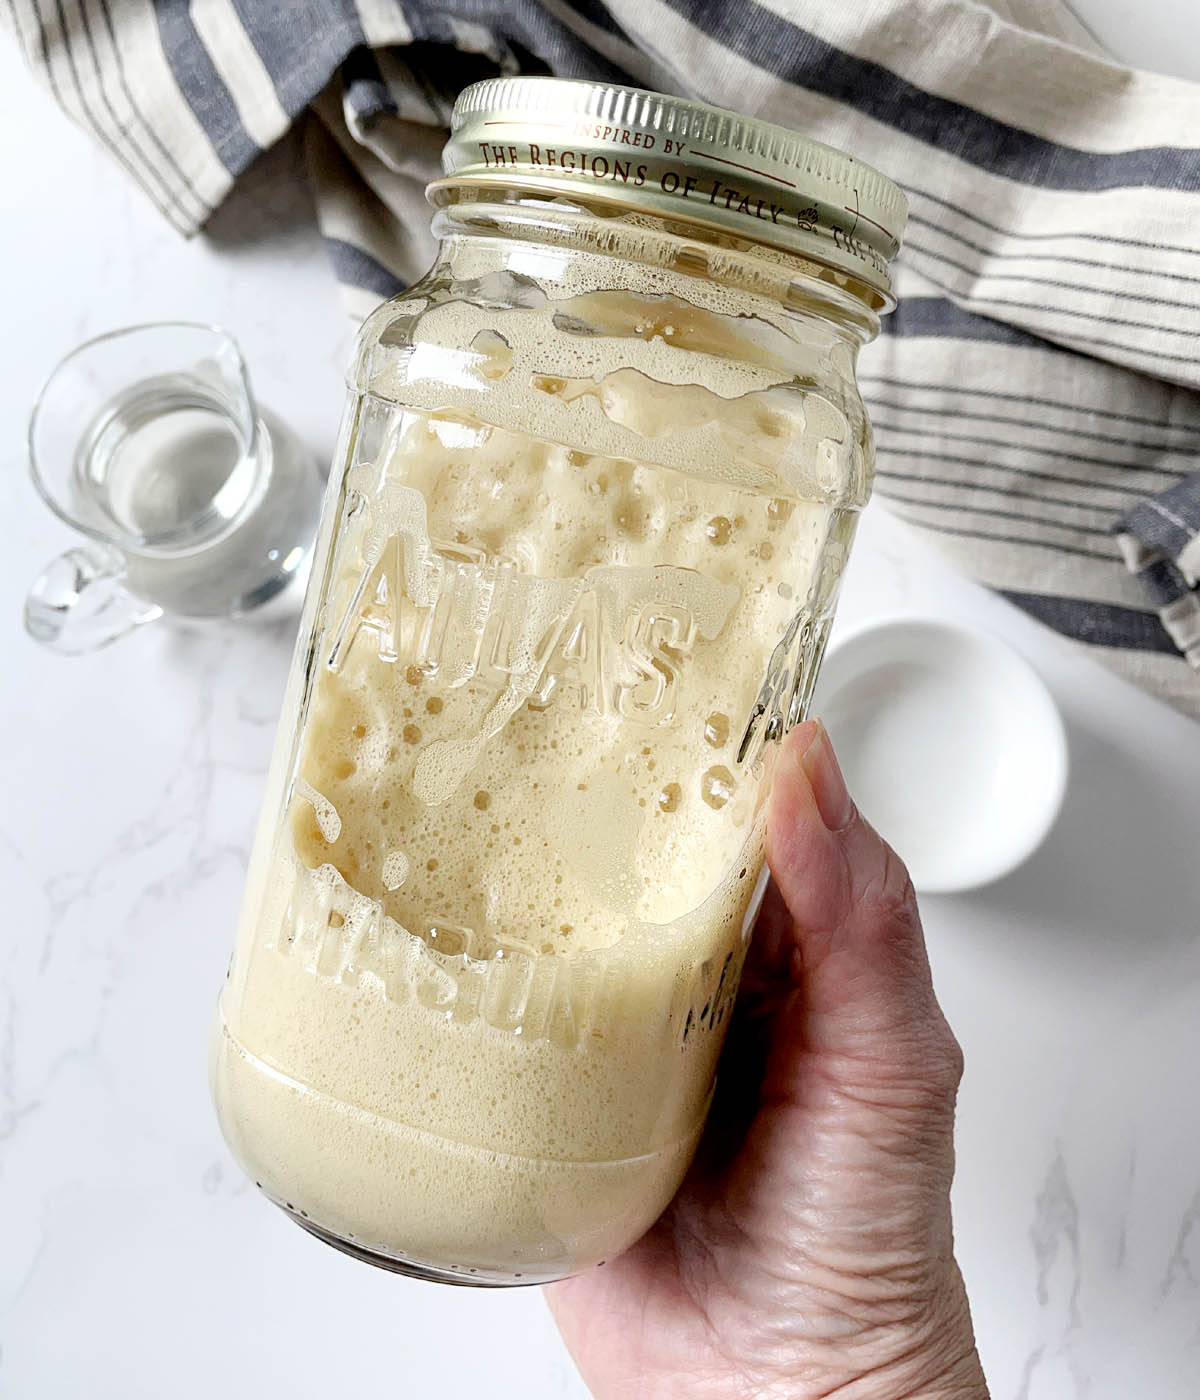 A hand holding a glass jar containing bubbly light brown foam.